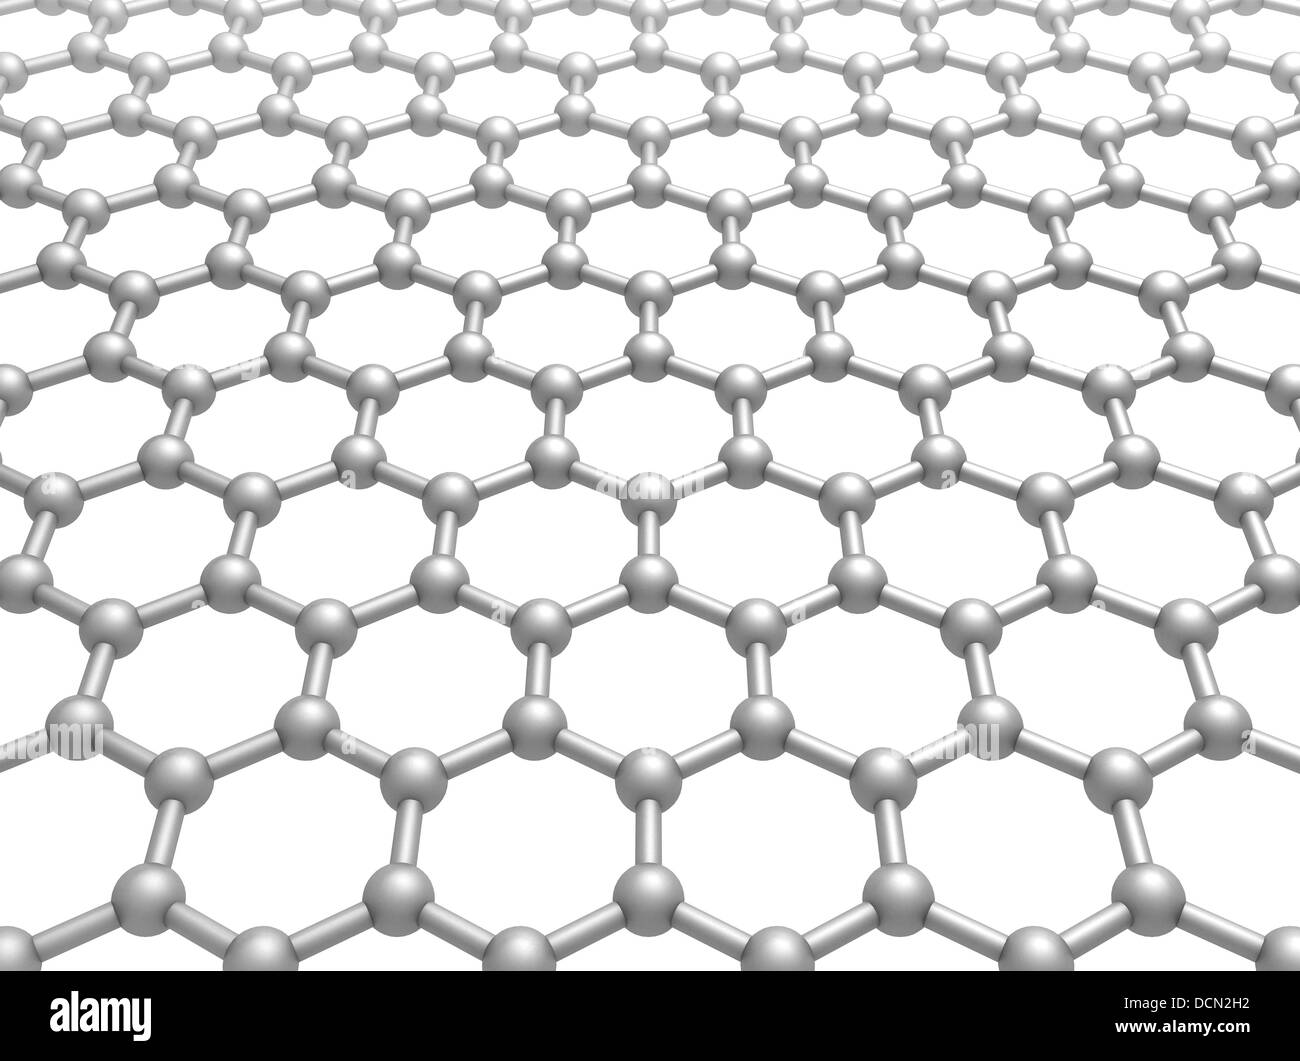 Graphene layer structure schematic model. 3d illustration isolated on white Stock Photo